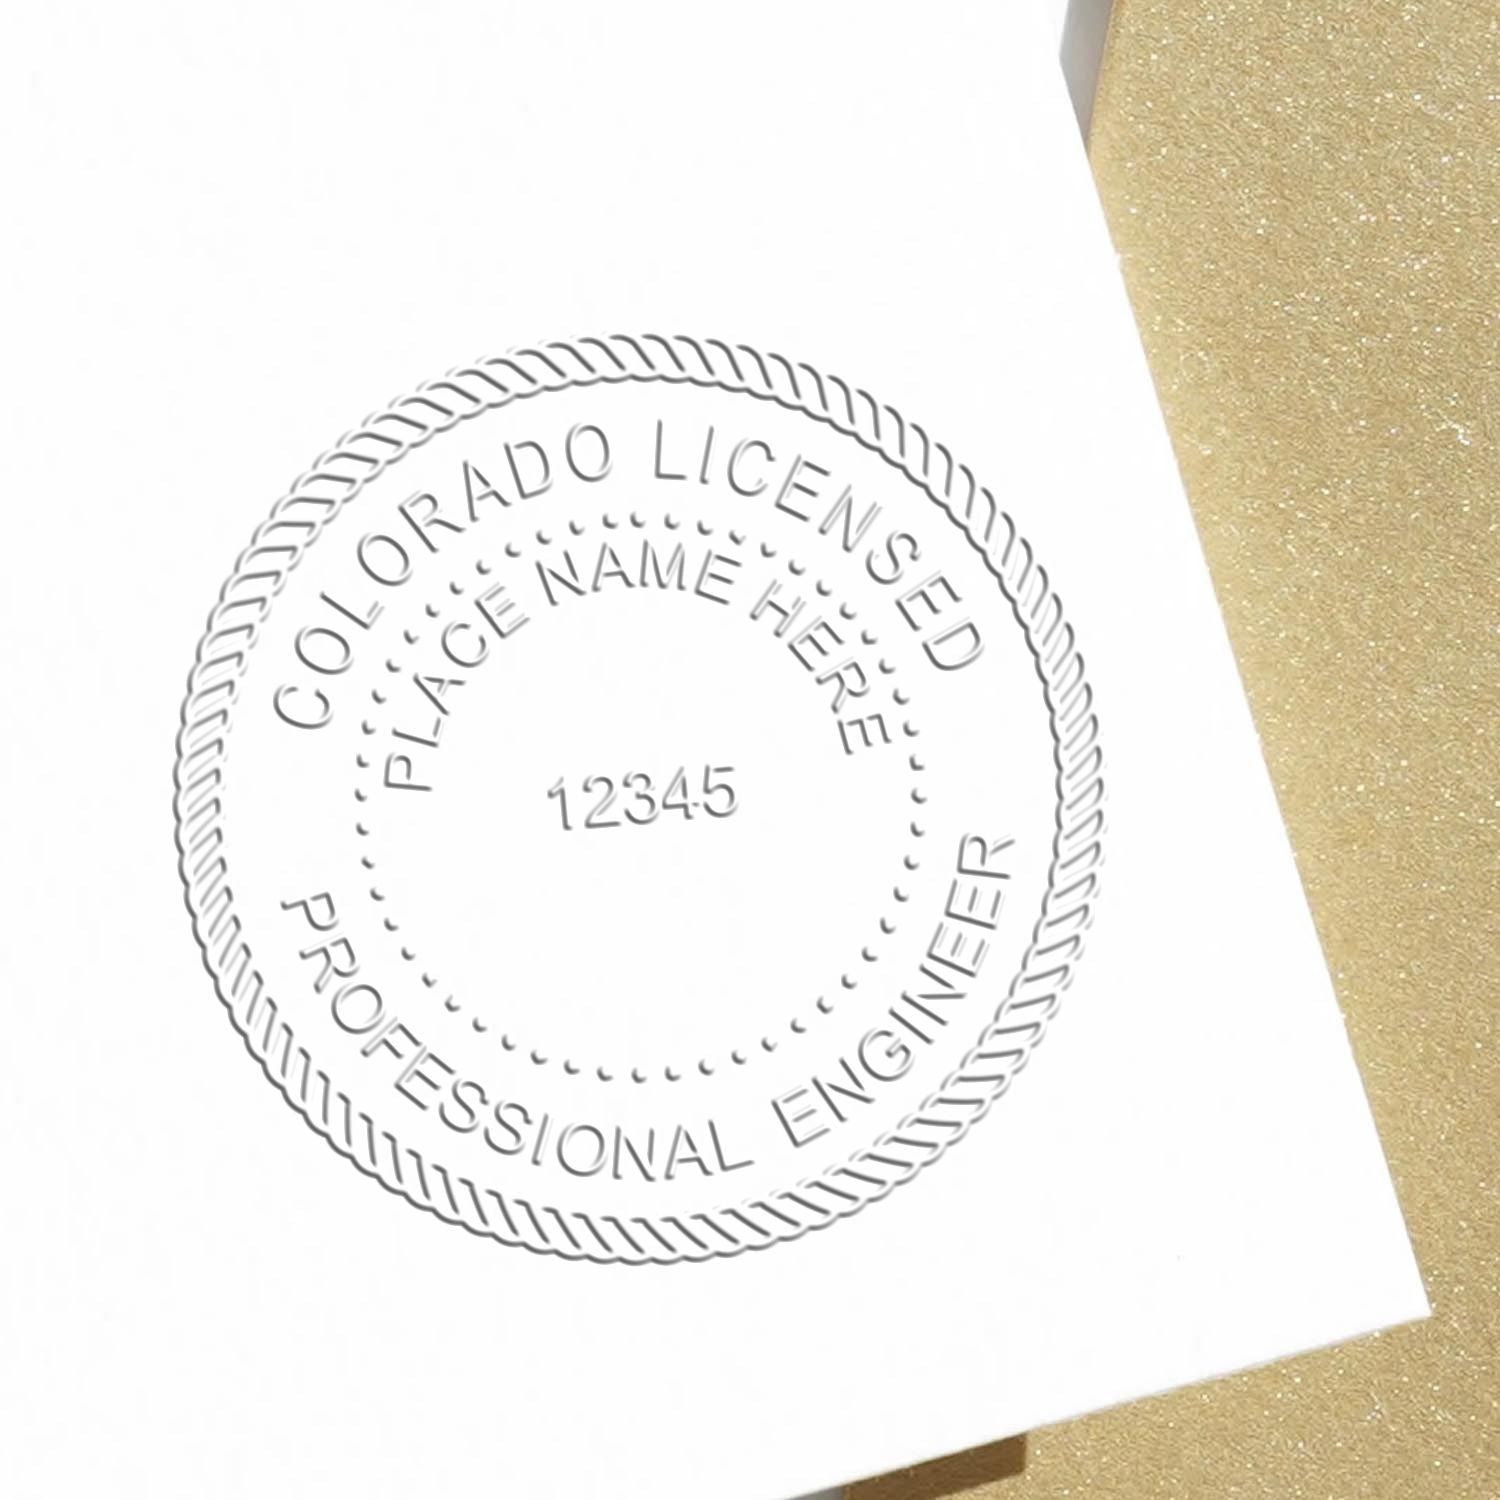 A photograph of the Colorado Engineer Desk Seal stamp impression reveals a vivid, professional image of the on paper.